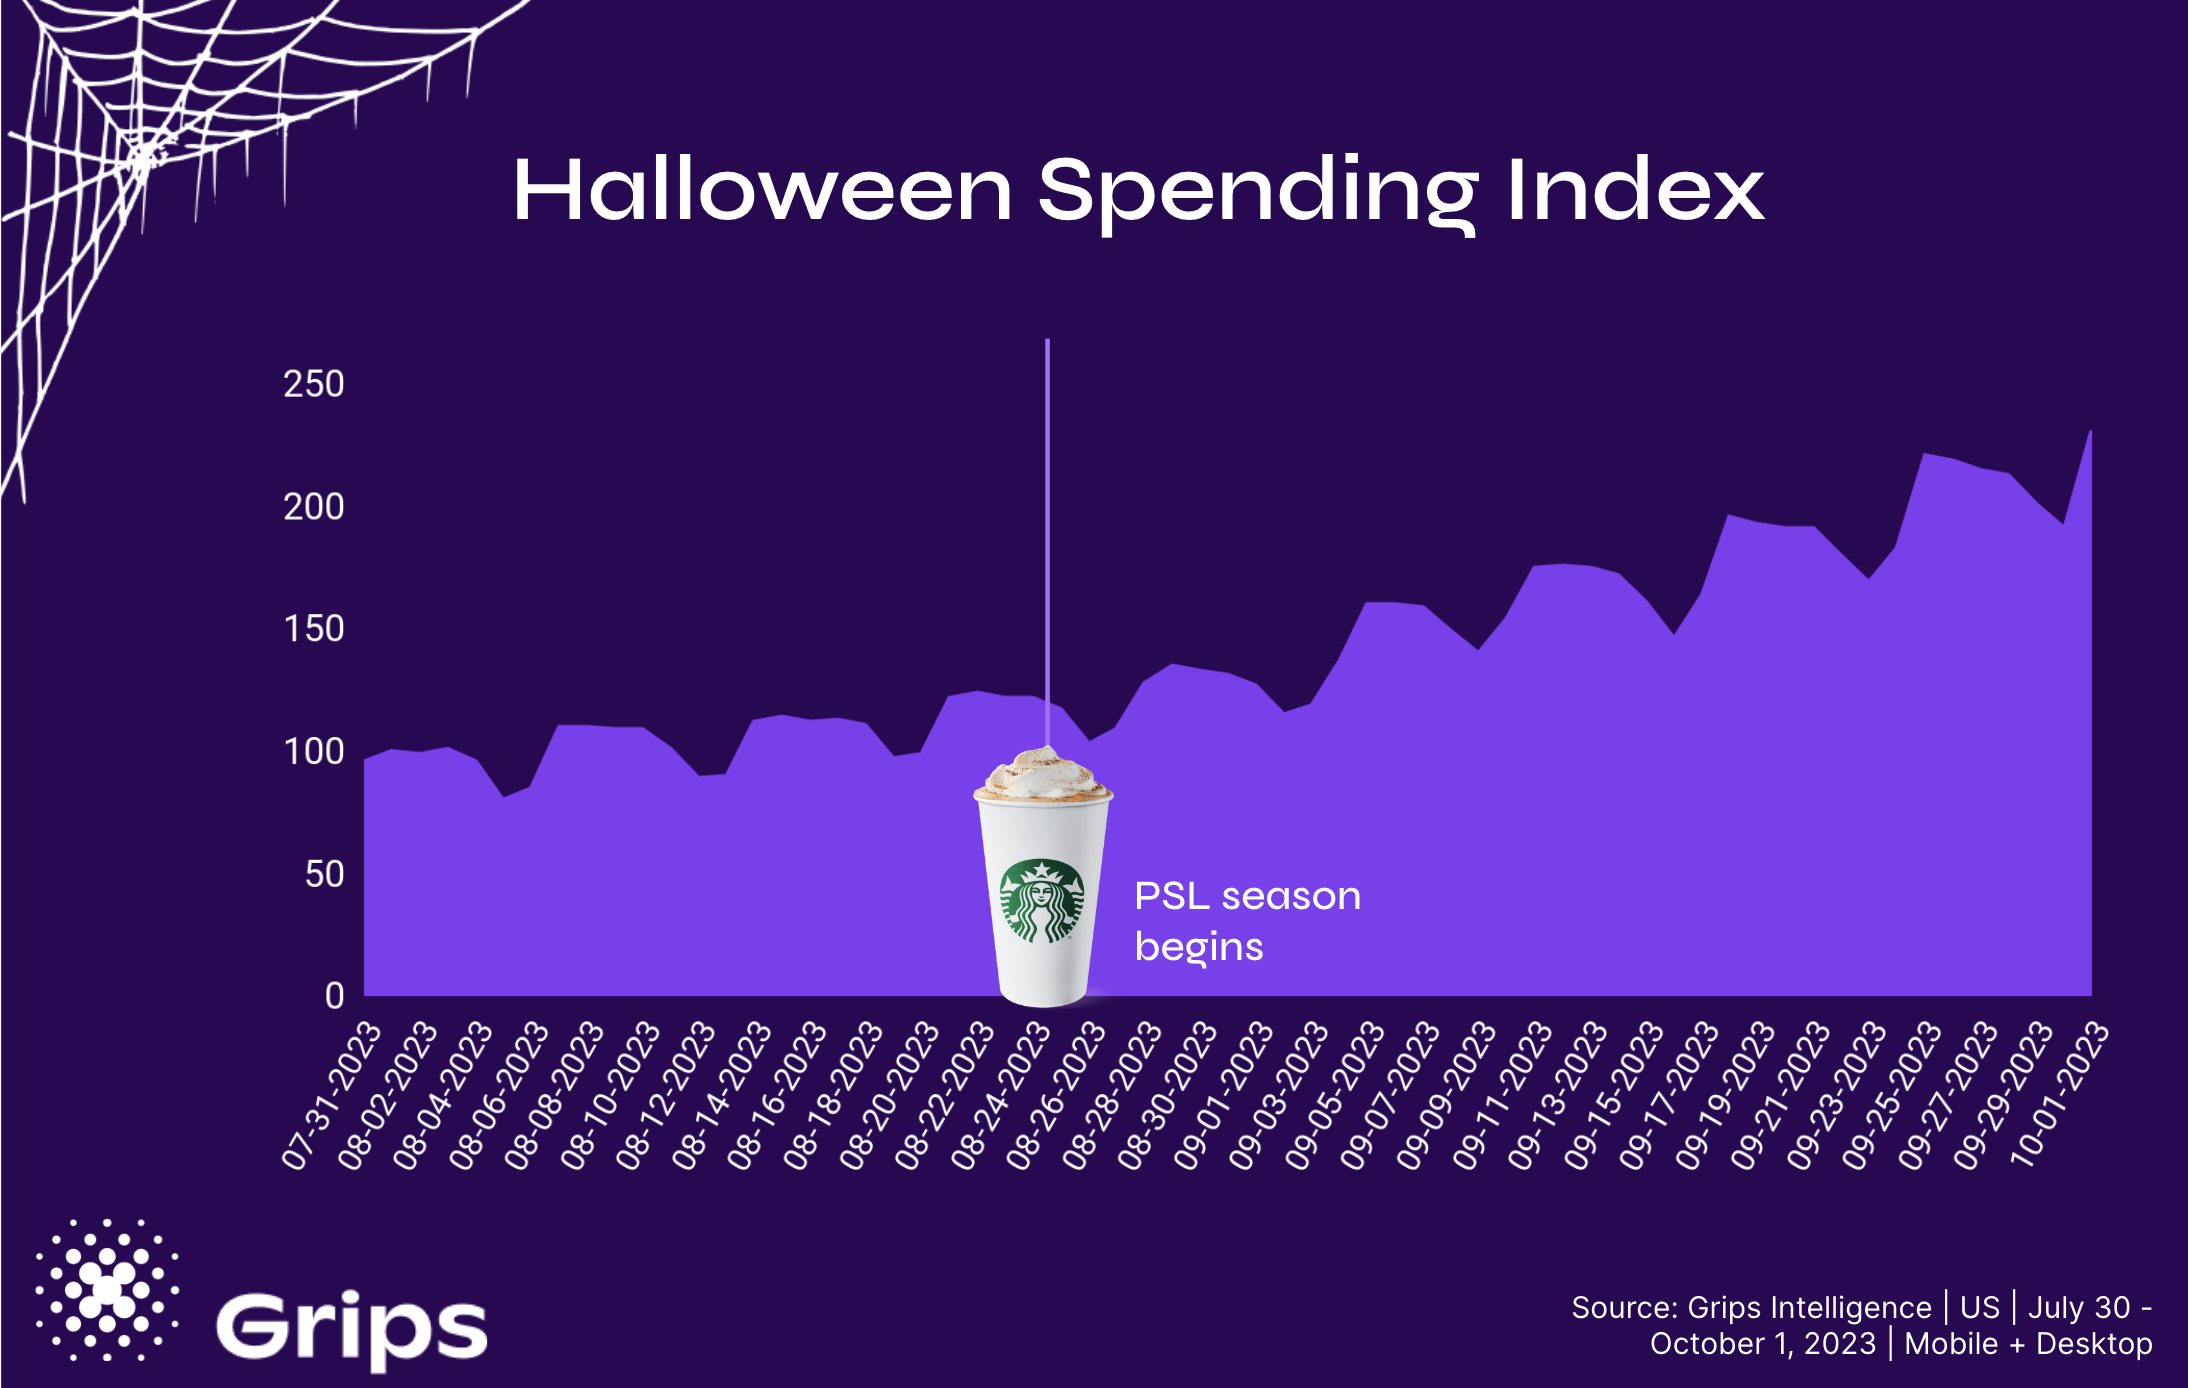 Halloween spending in the United States increased 26 percent in the last week and 112% since the return of the Starbucks pumpkin spice latte.